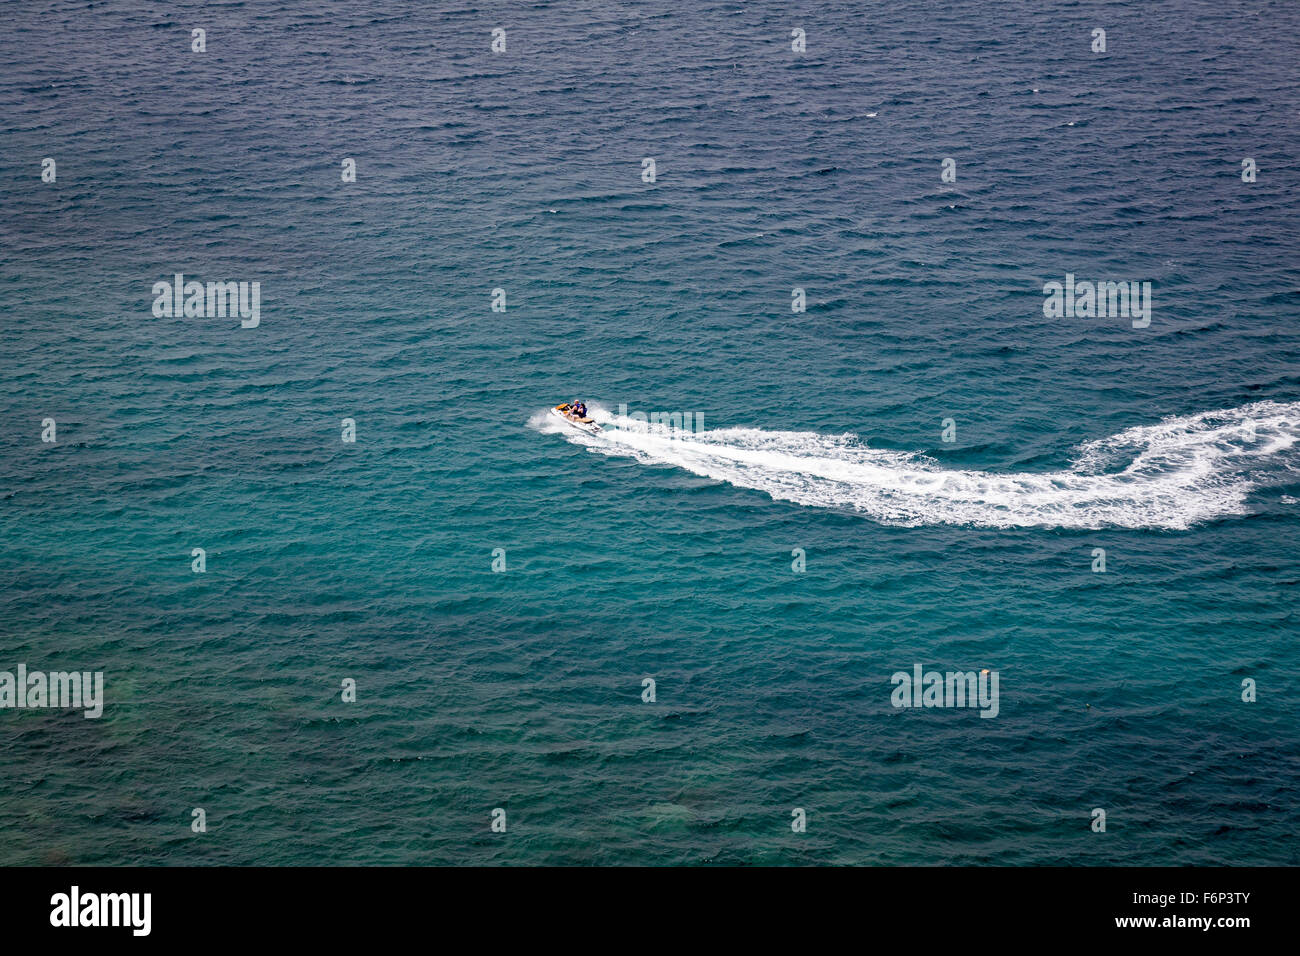 Viewed from above, a speed boat creates a dramatic white wash across a turquoise tropical sea. Stock Photo